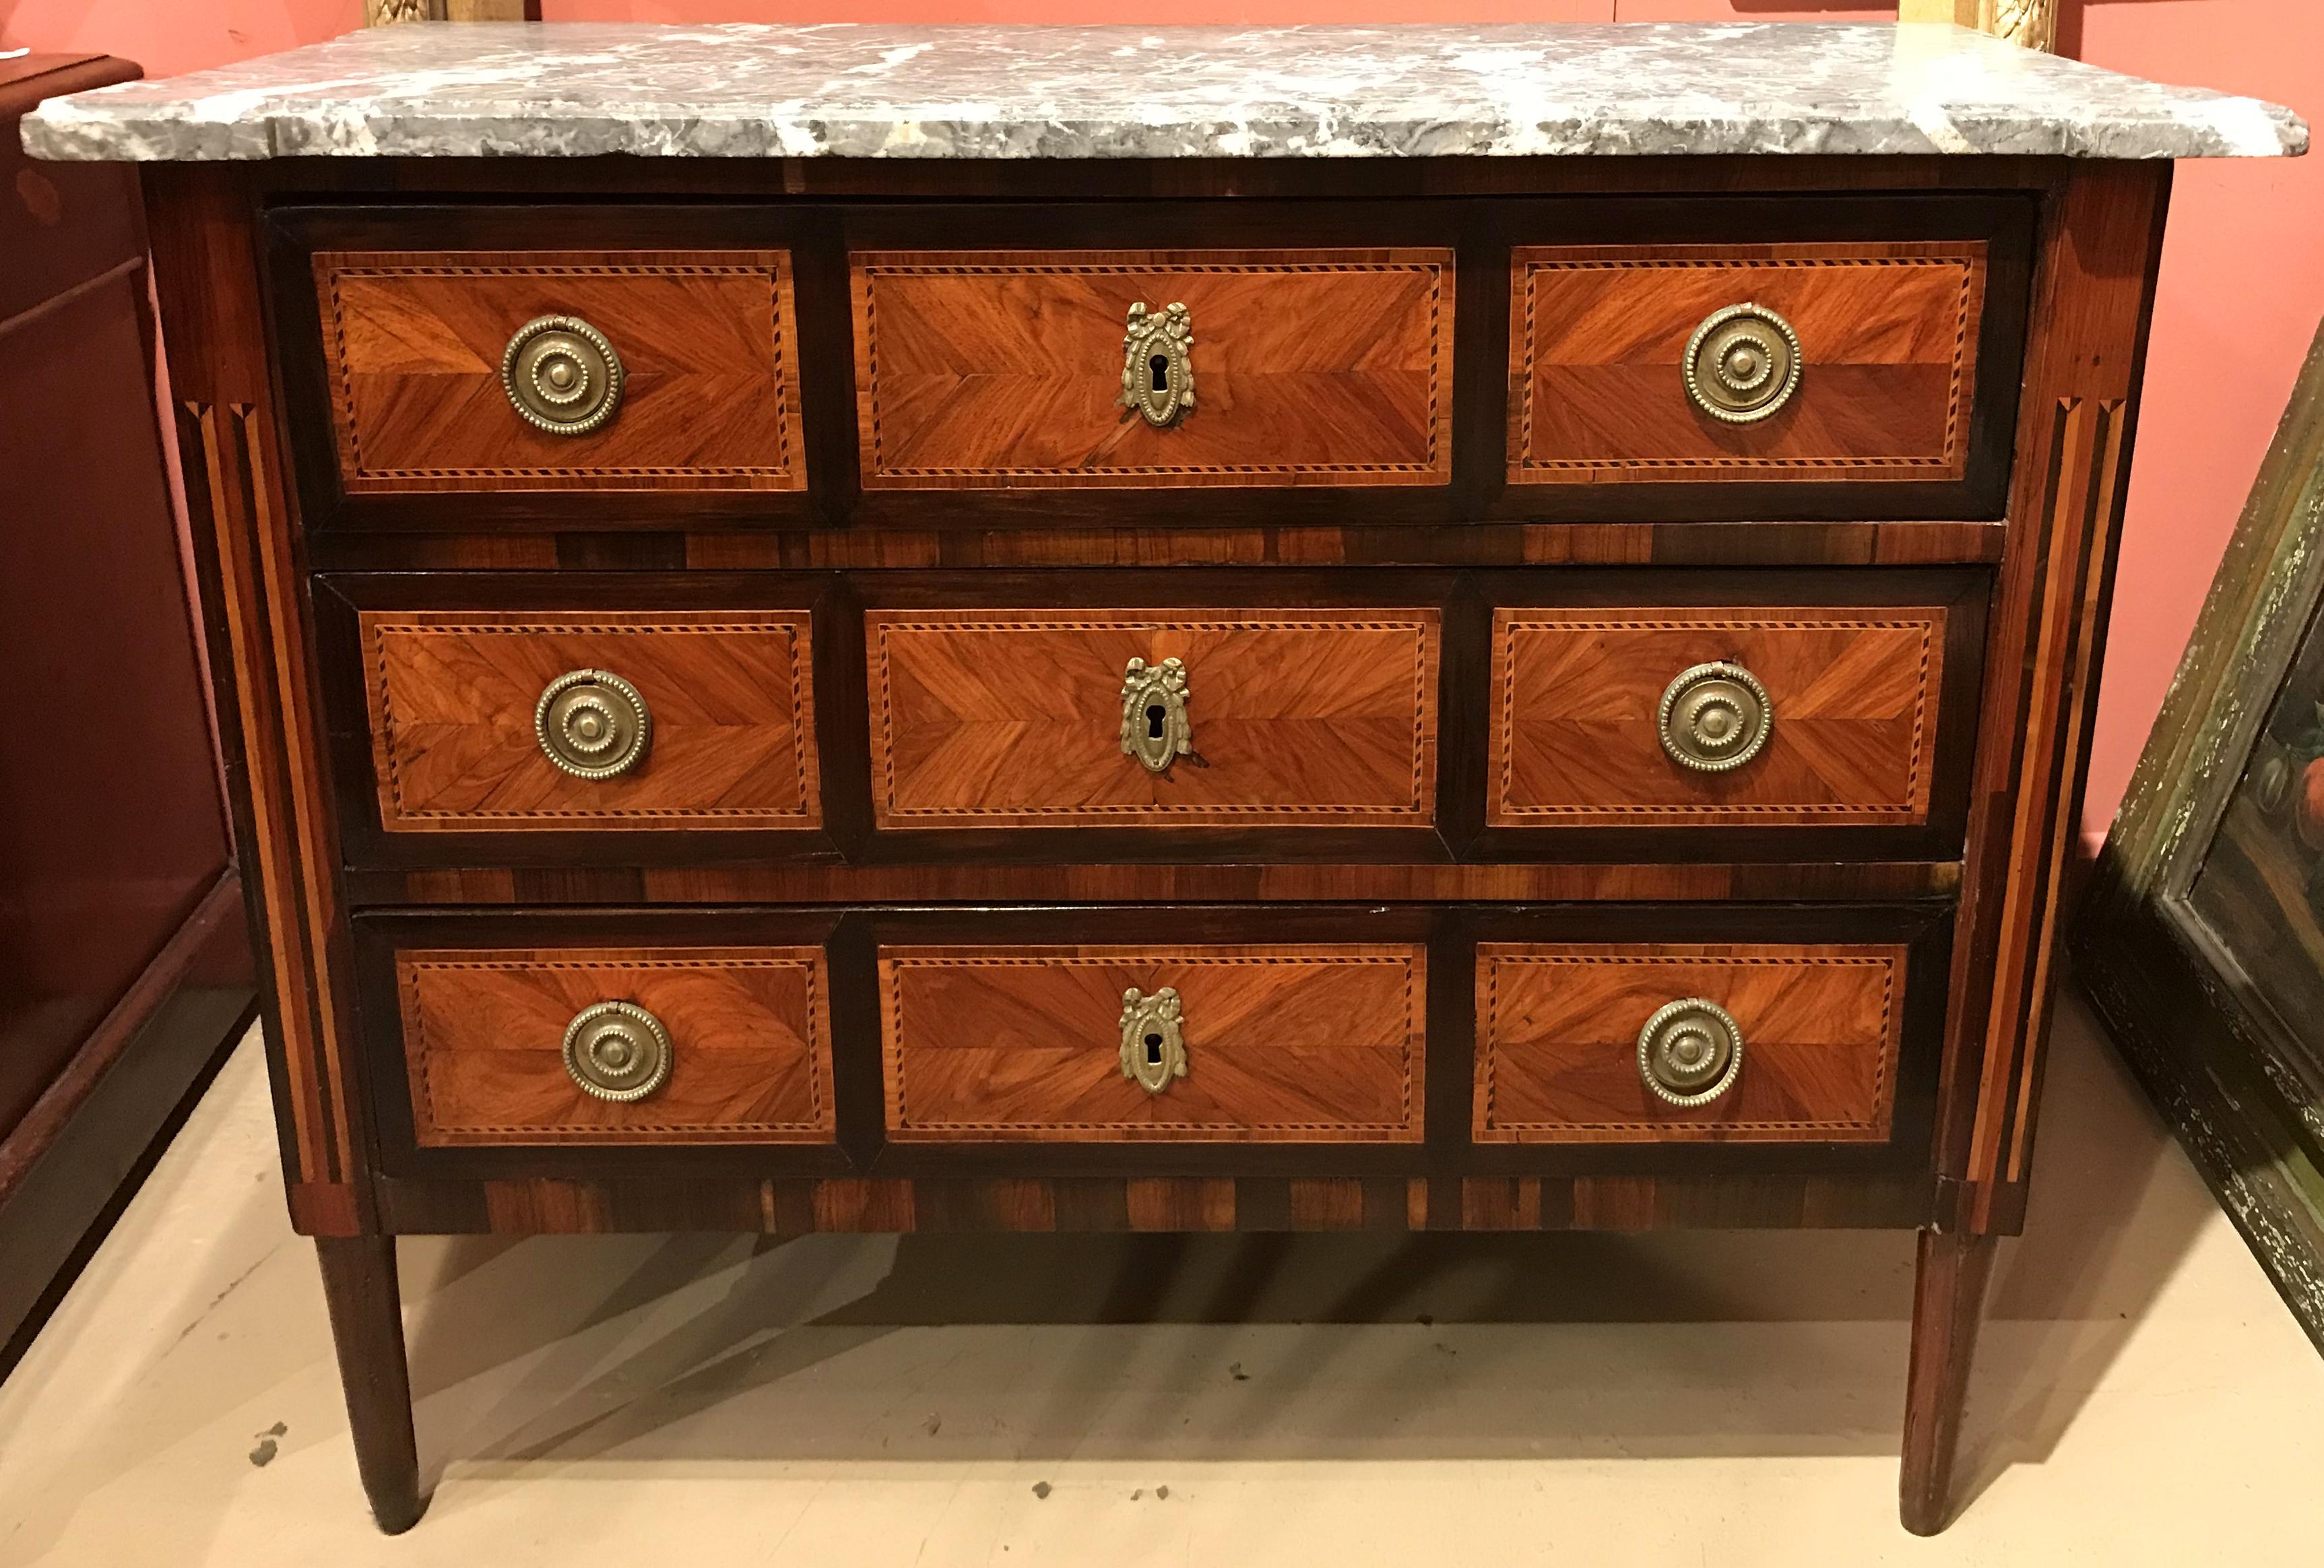 A beautiful mahogany chest of drawers with an associated gray variegated shaped marble top surmounting a case with three drawers, each with three bookmatched veneered cross-banded panels with checkered border accents and original brass ring pulls